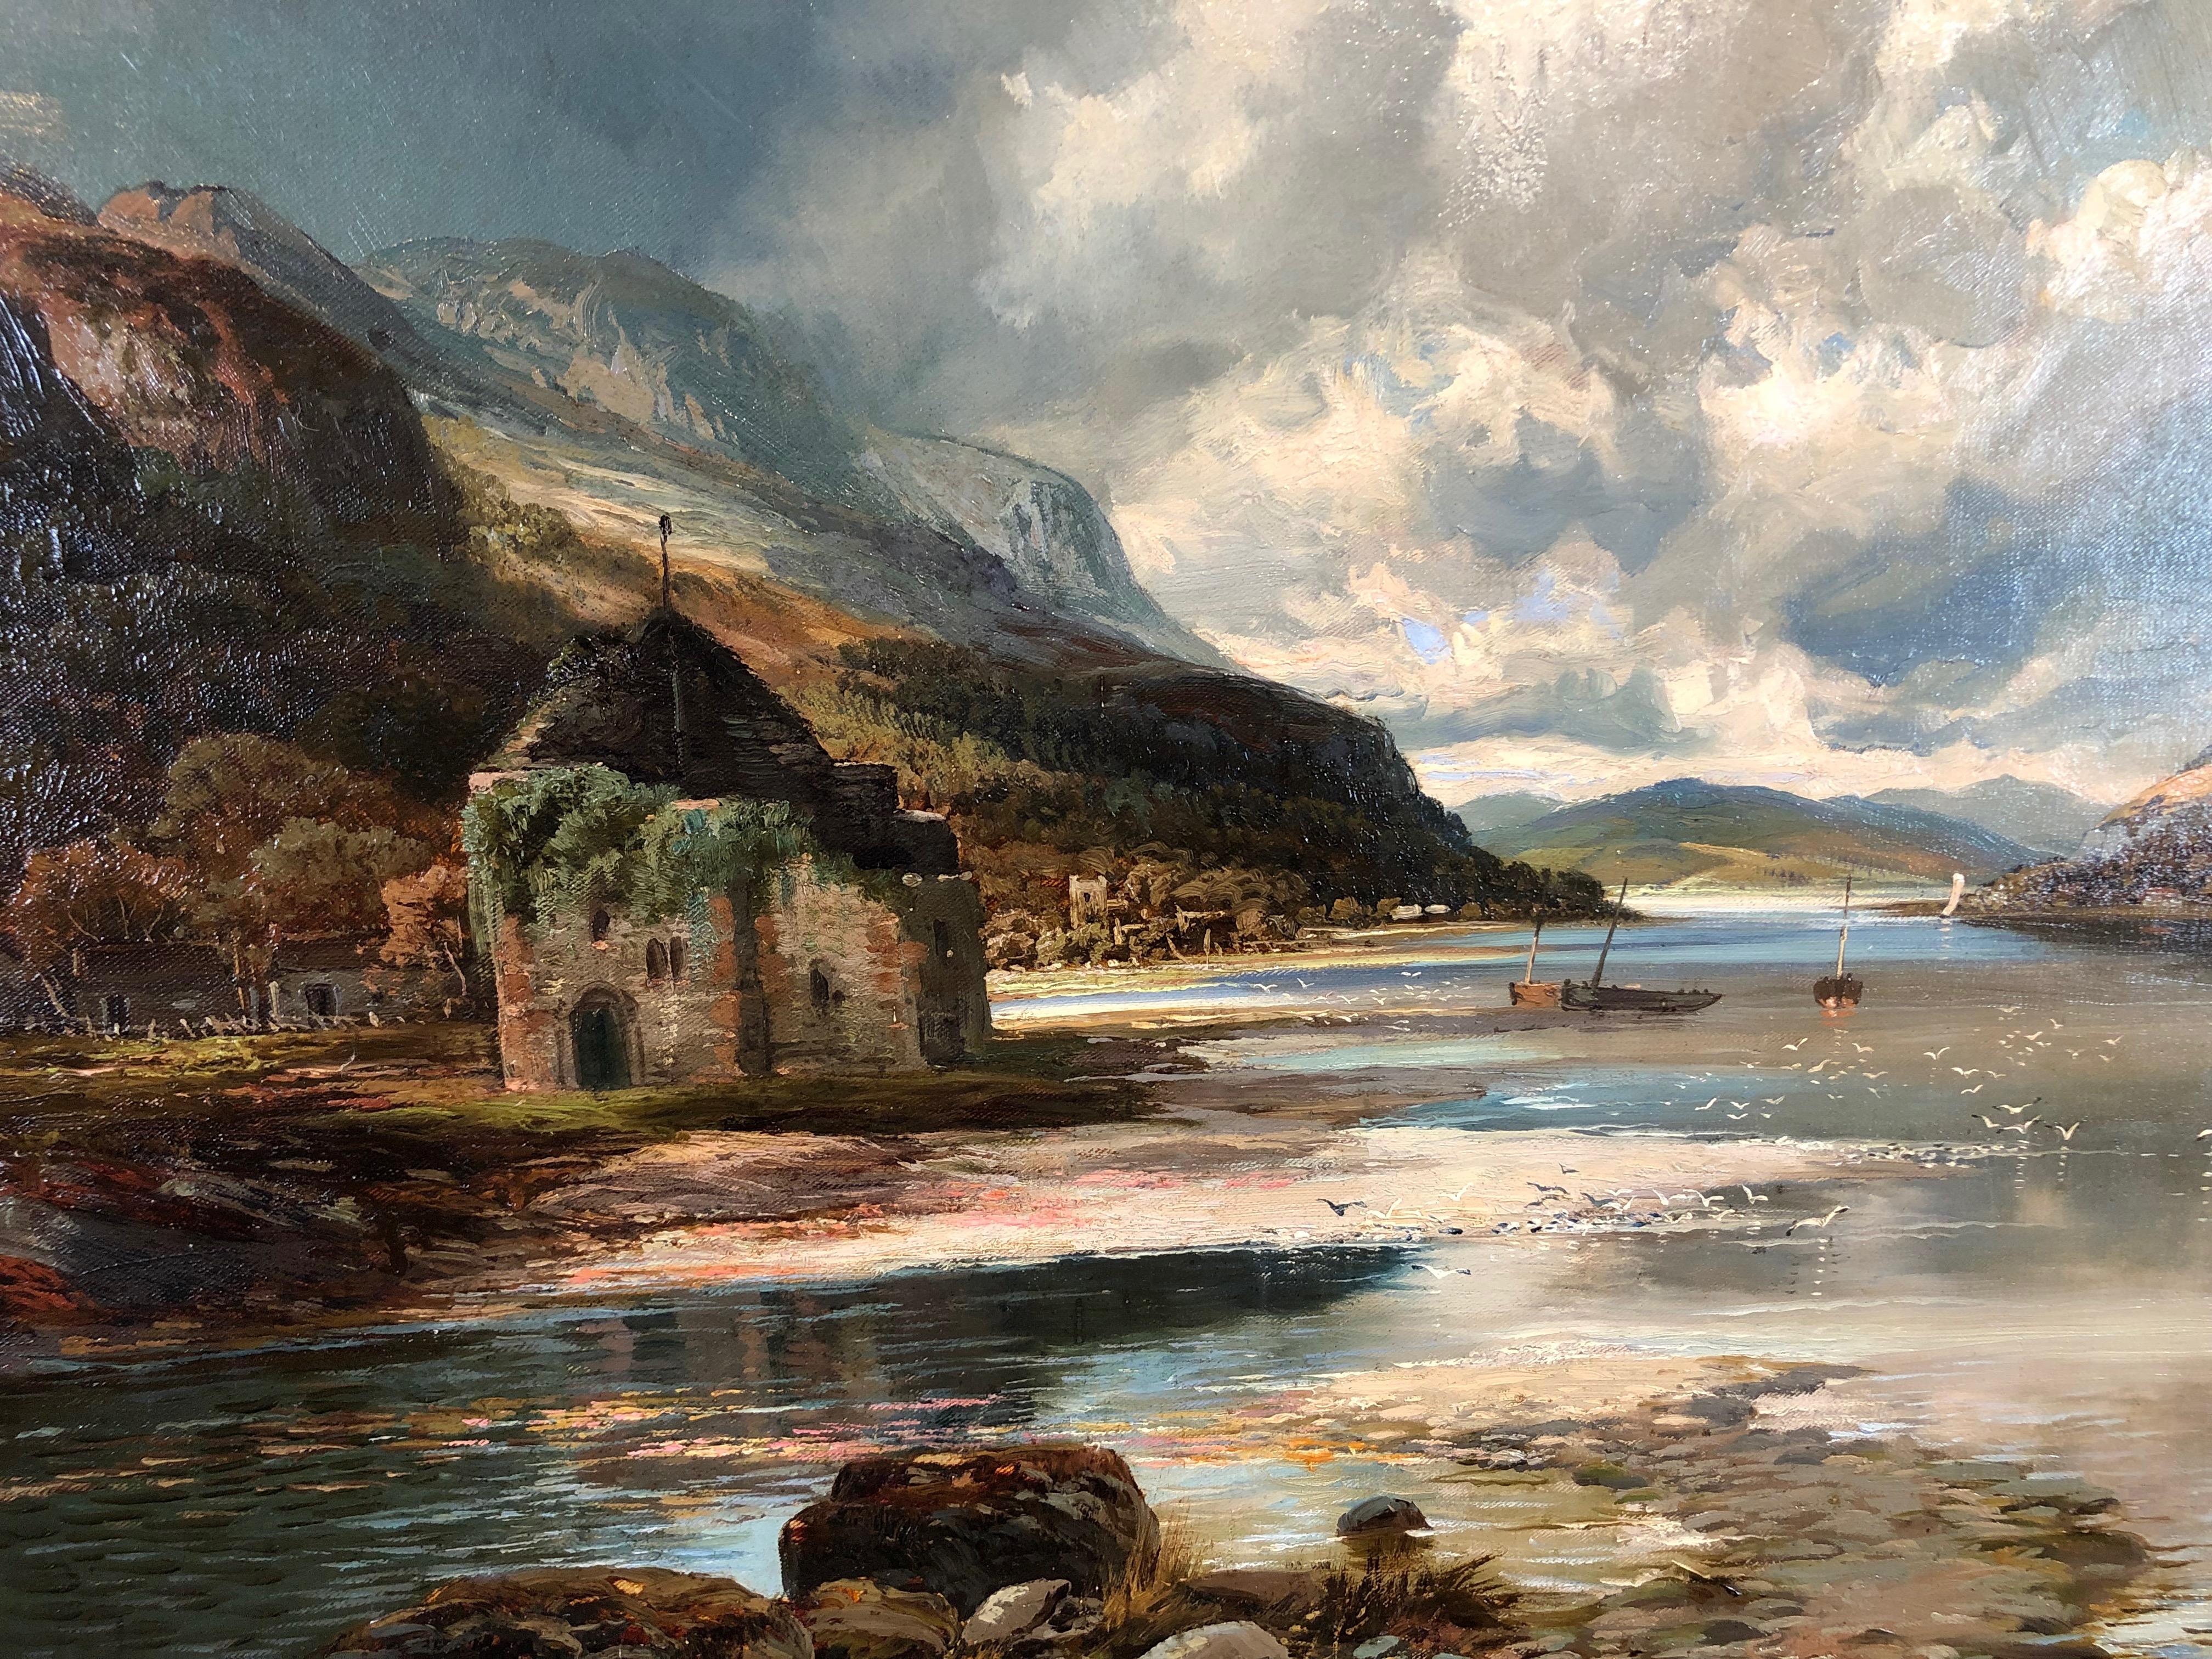 Clarence Henry Roe 1850-1909 was a London painter of Highland landscapes, having exhibited at the Royal Hibernian Academy.
An entrancing work captivating the tempestuous Scottish skies and rugged landscape 